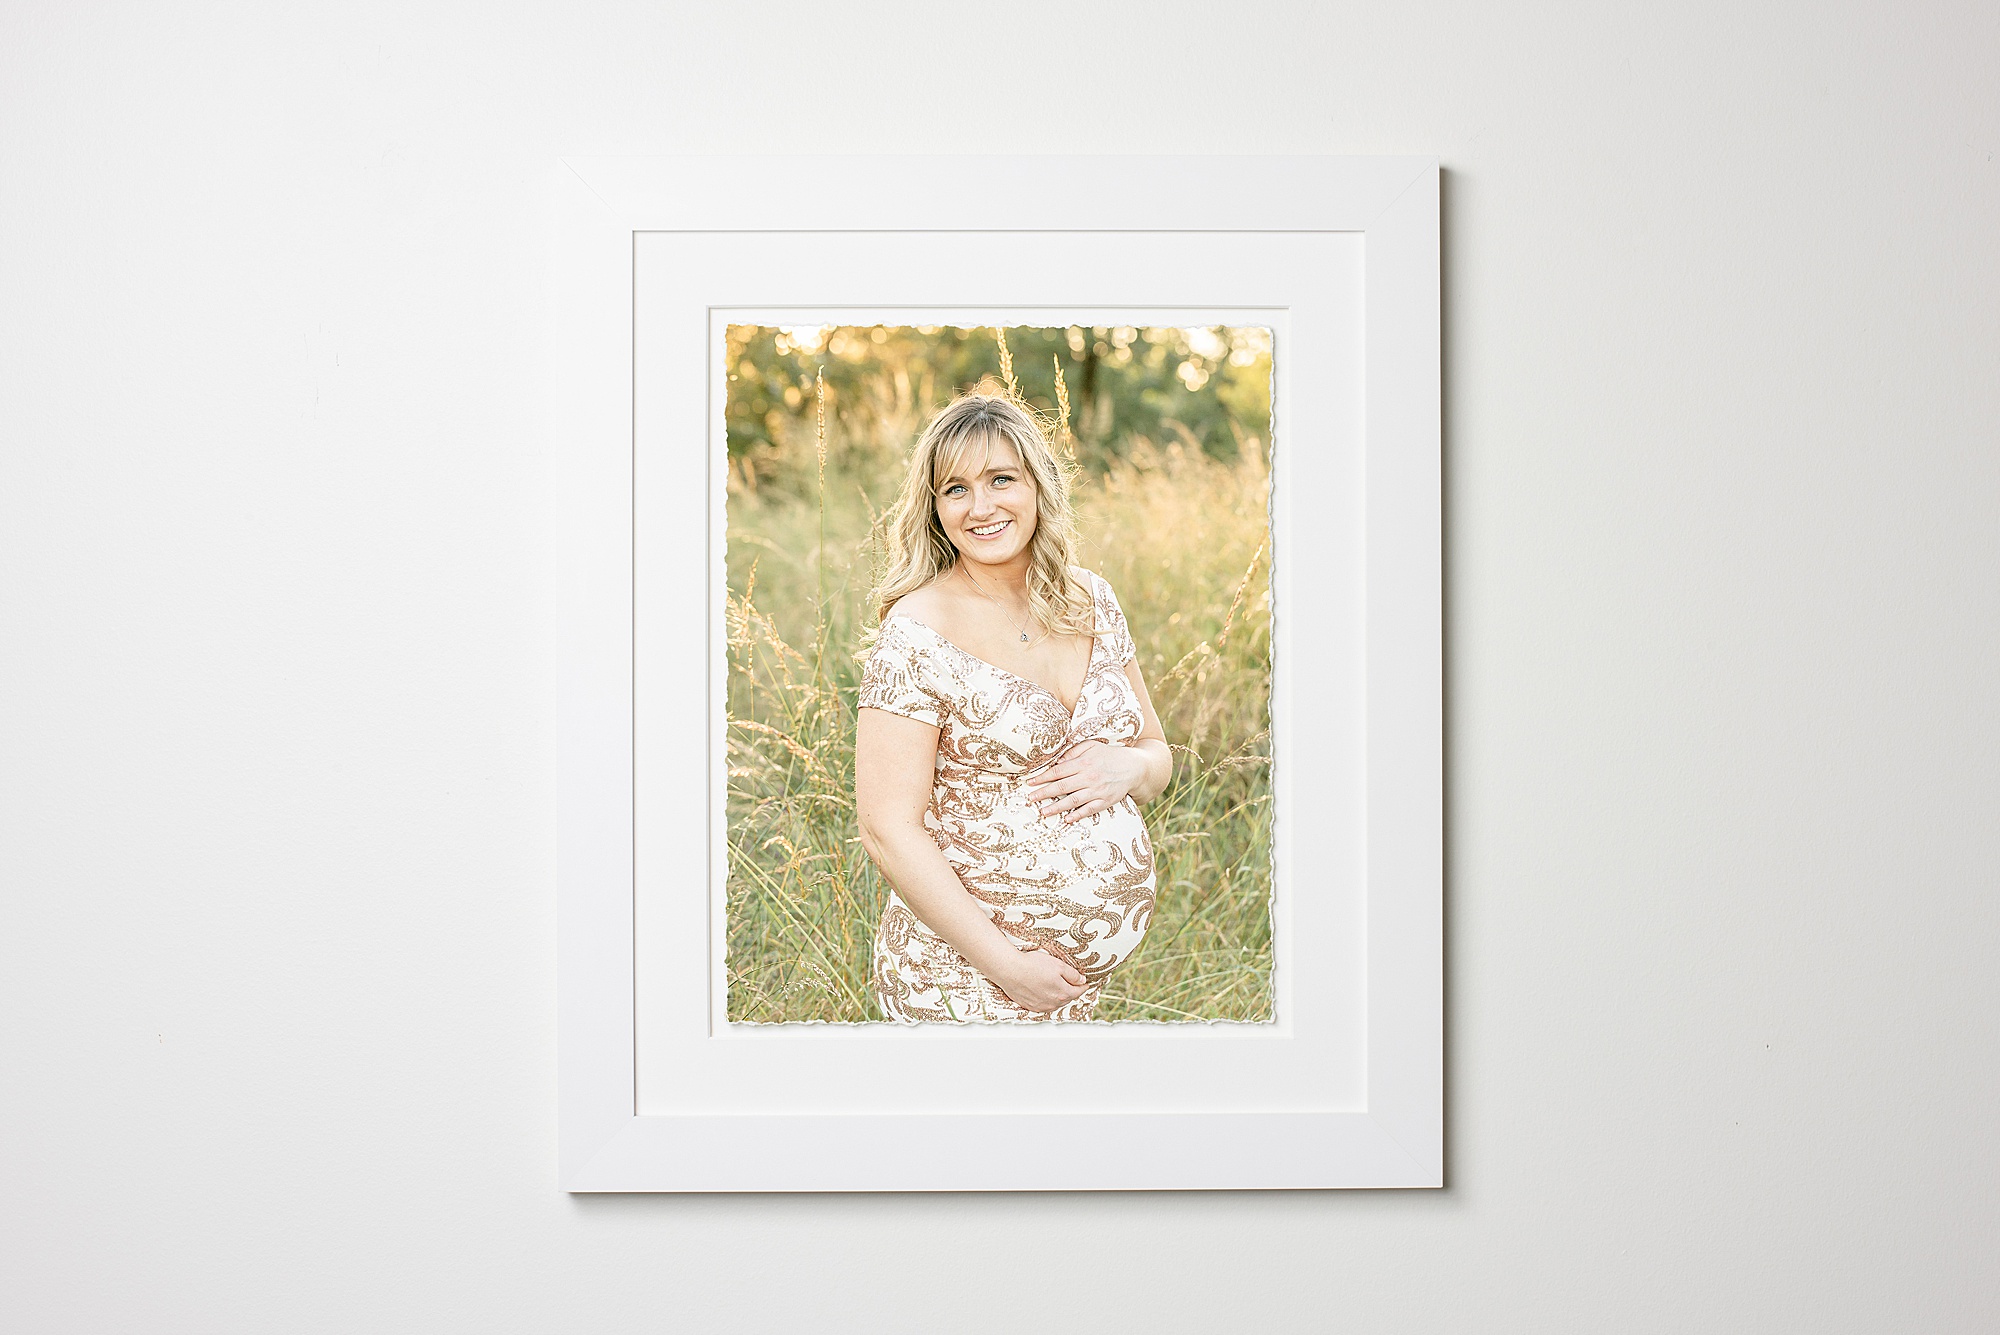 White Framed Deckled Maternity Portrait of woman in white & gold dress